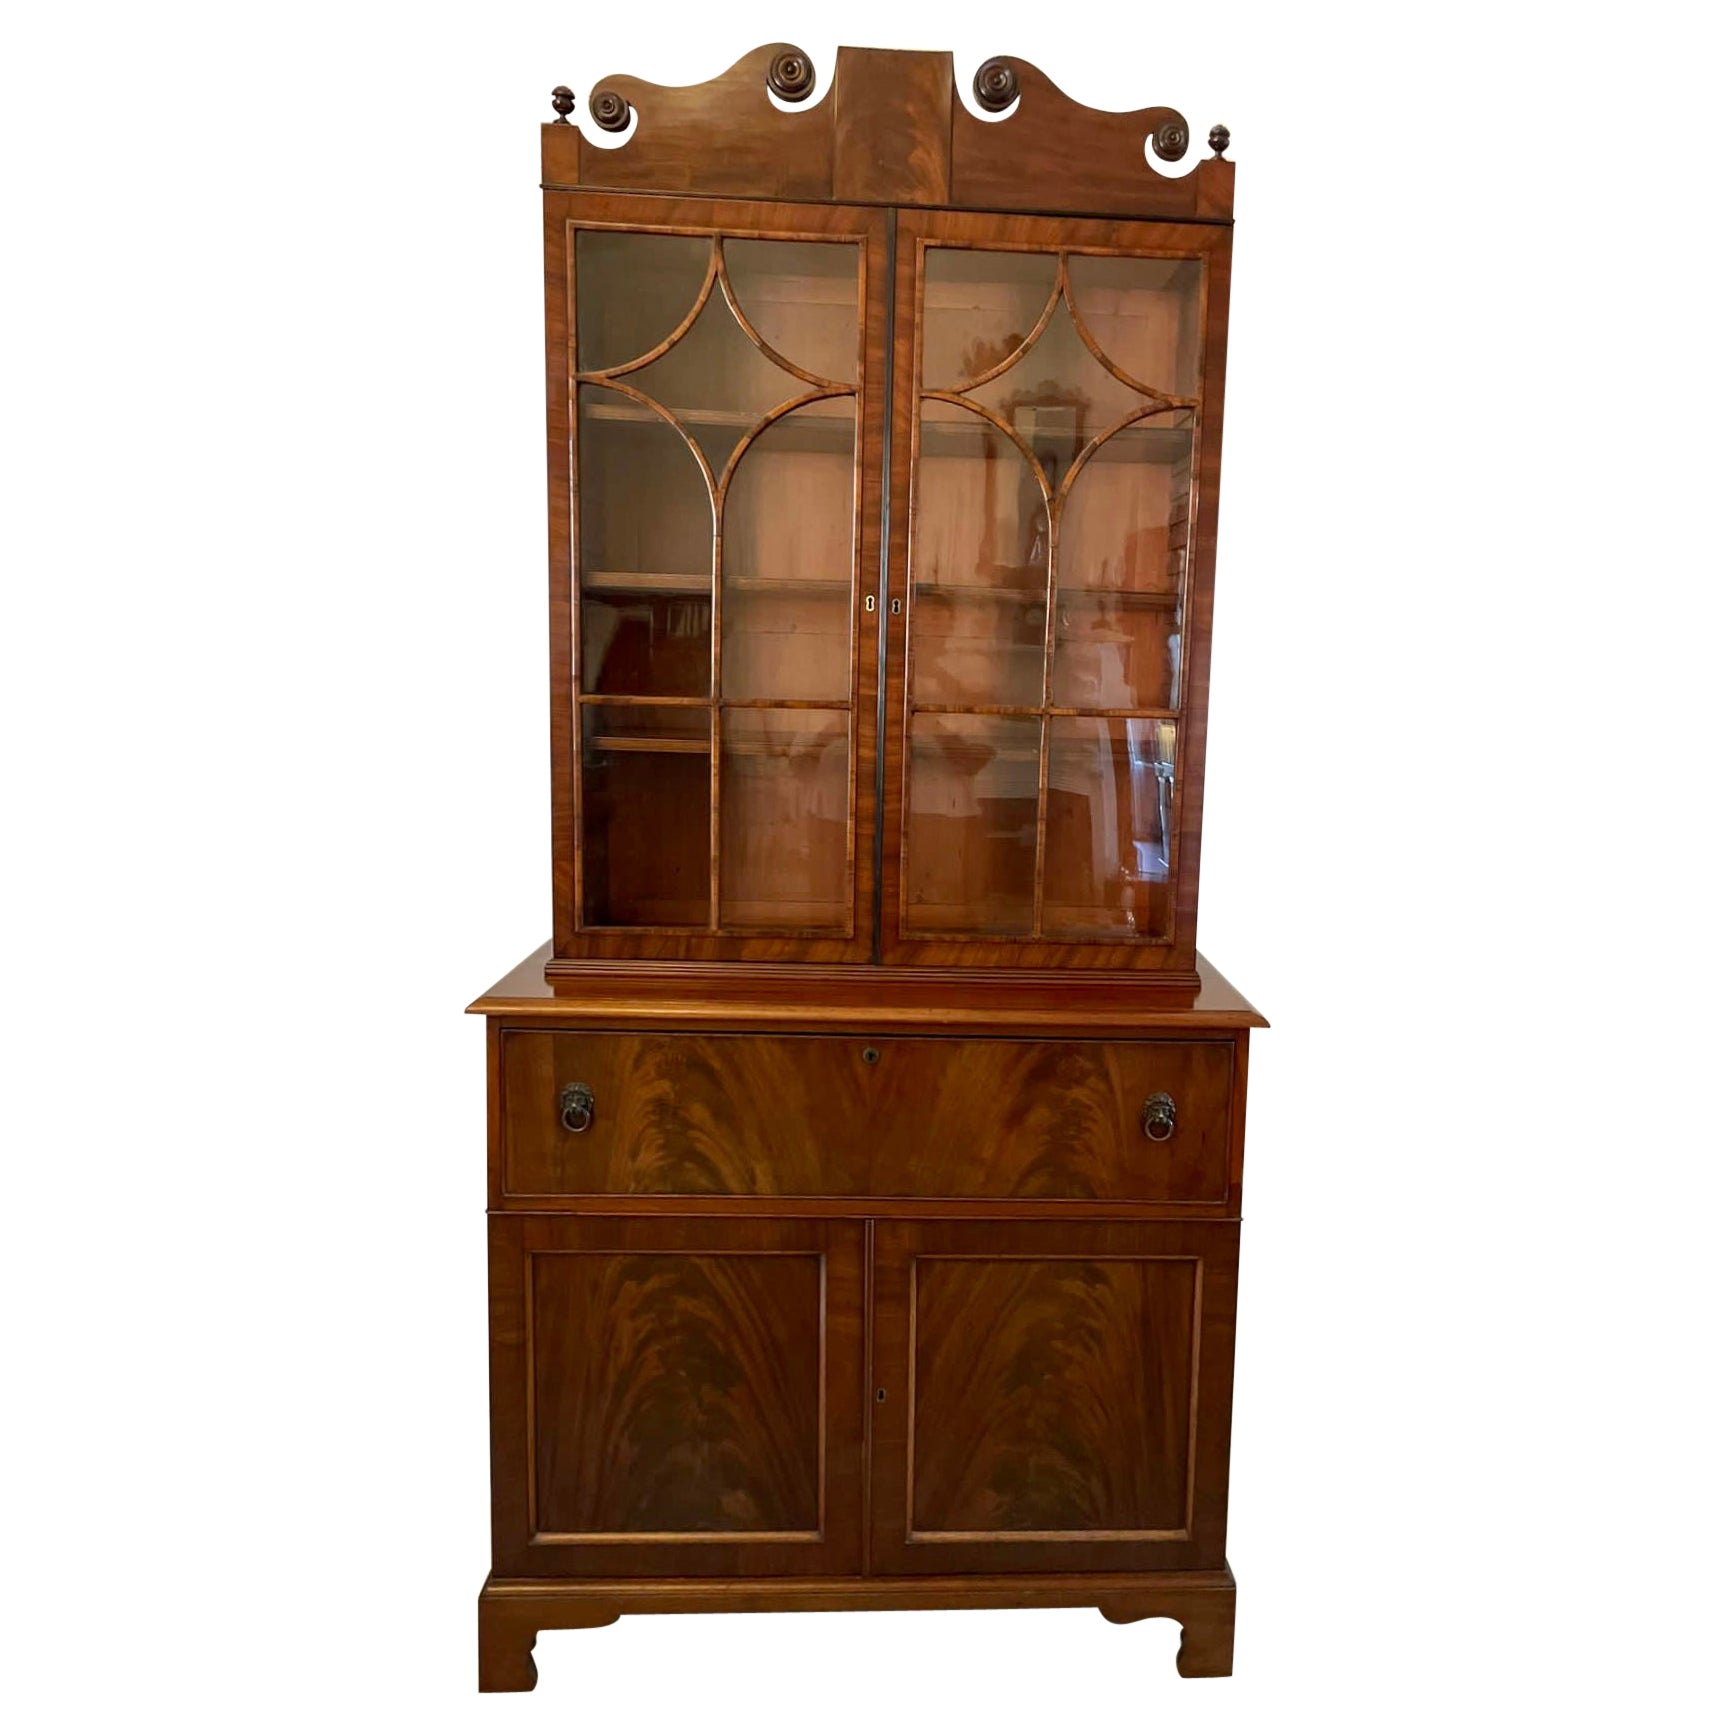 Outstanding Quality Antique Regency Mahogany Secretaire Bookcase  For Sale